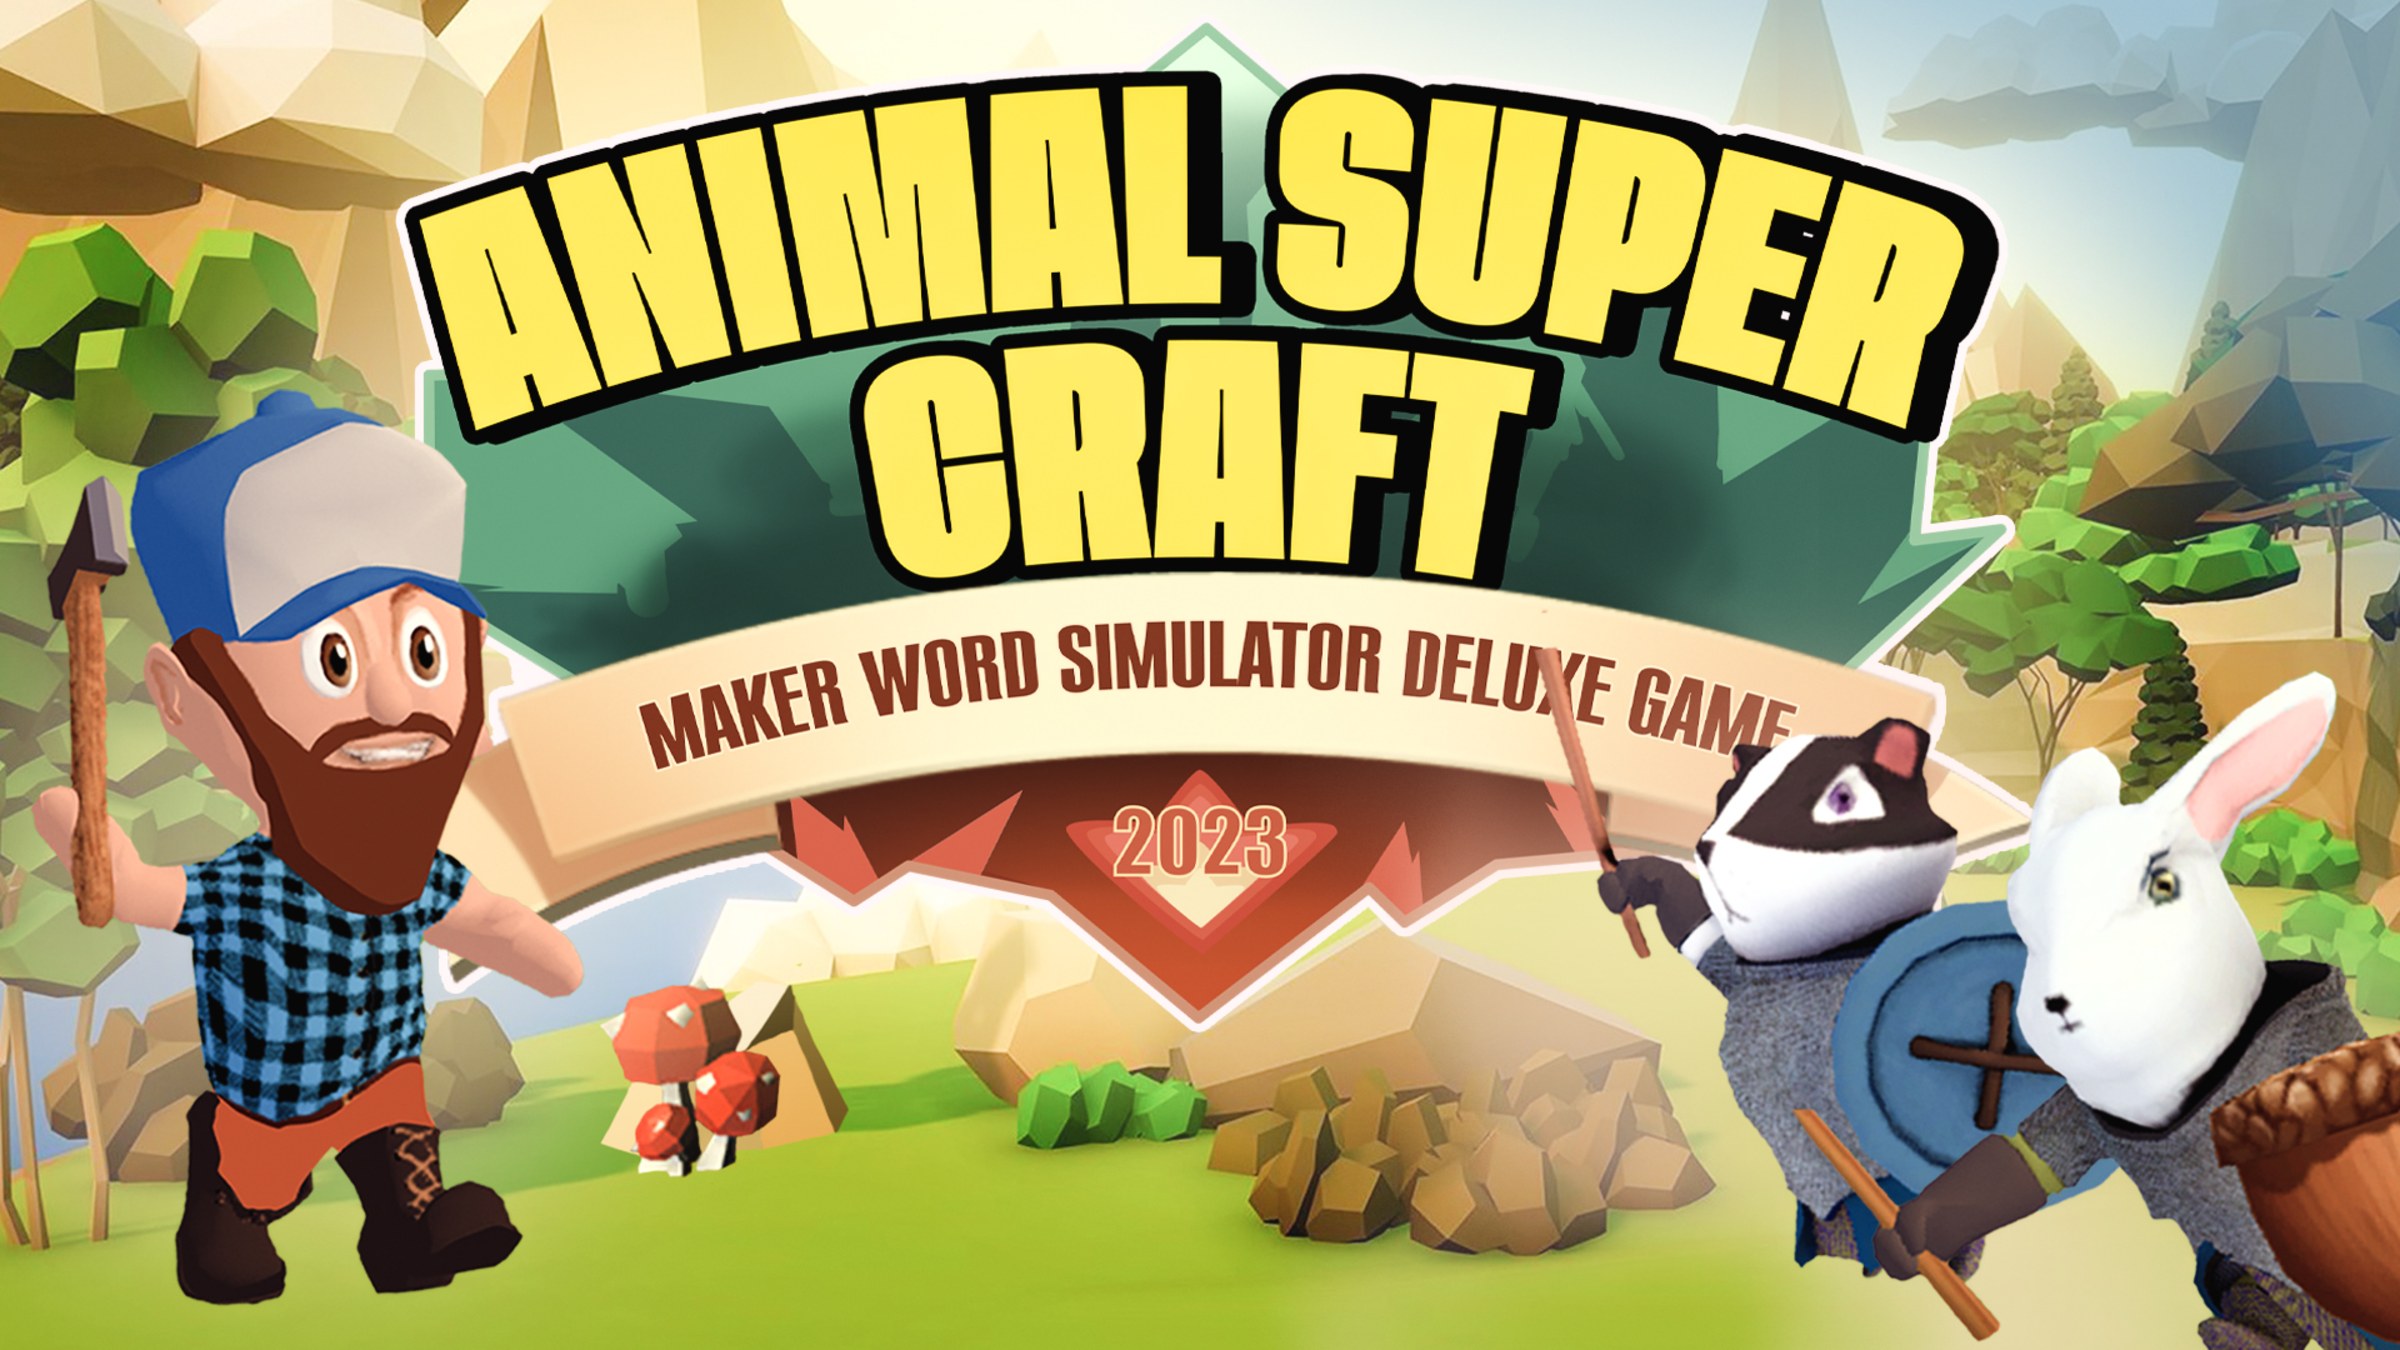 Animal Super Craft - Maker Word Simulator Deluxe Game 2023 for Nintendo  Switch - Nintendo Official Site